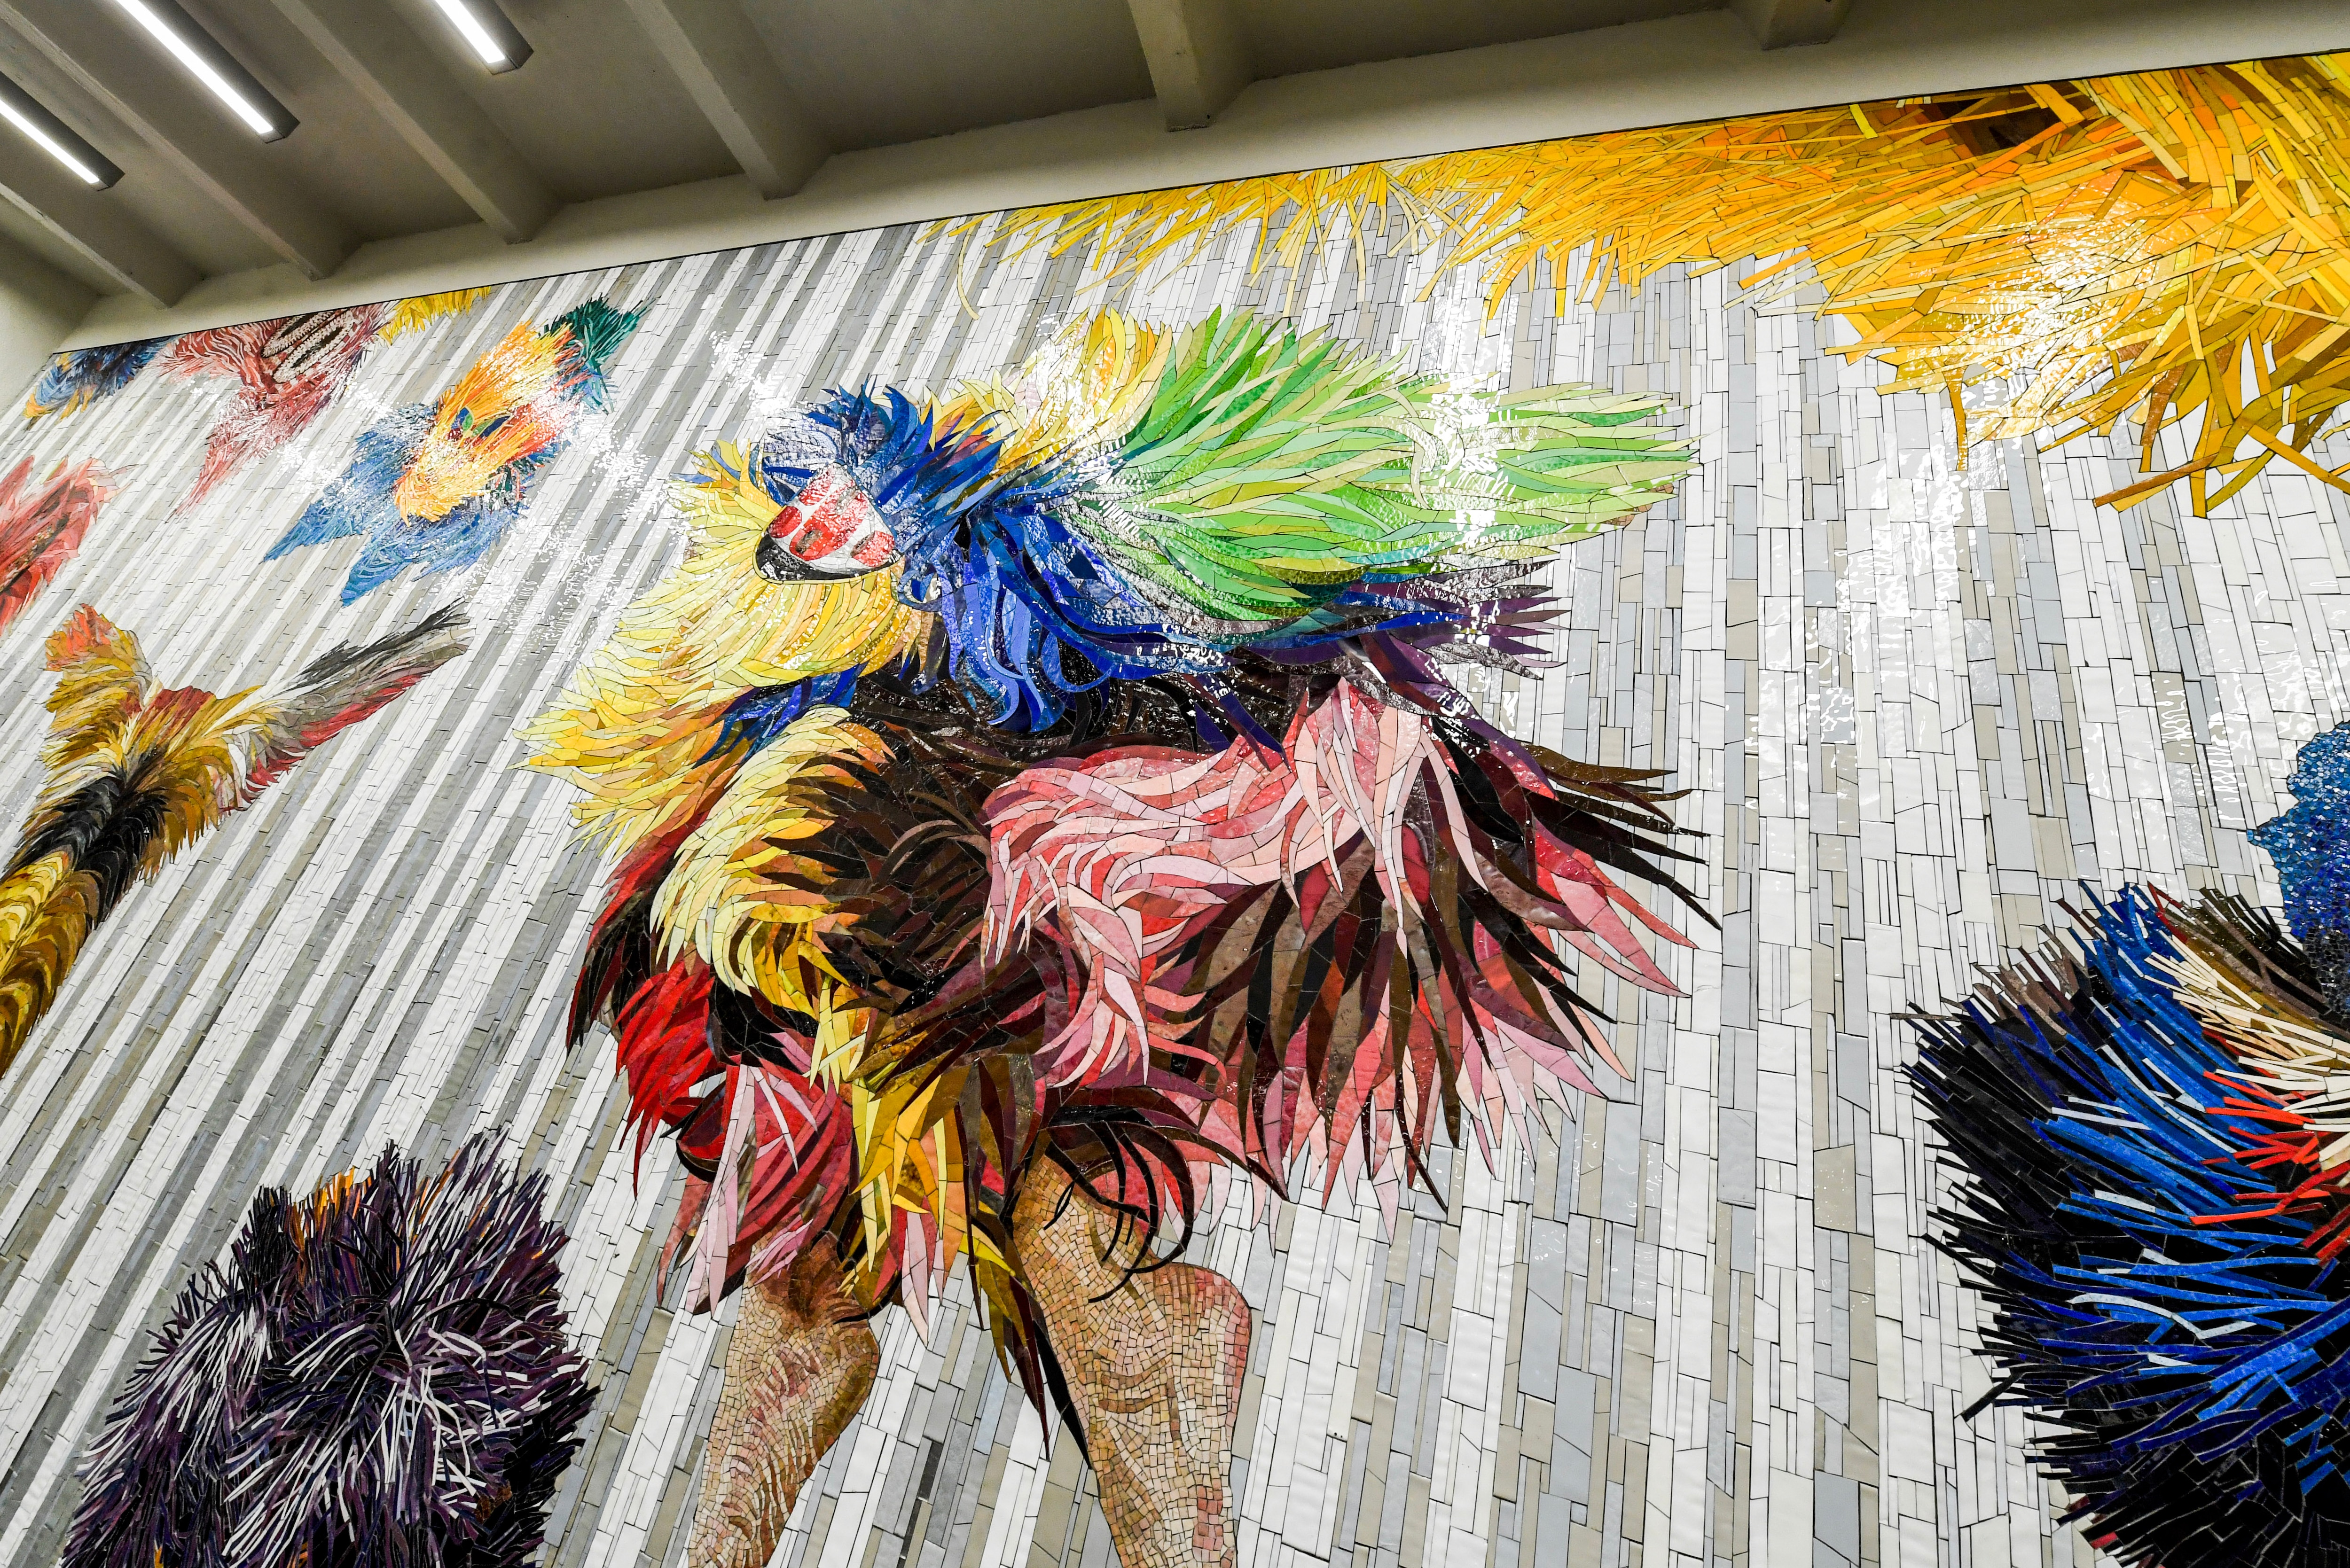 Artwork in mosaic by Nick Cave showing people dancing in brightly colored costumes known as Soundsuits